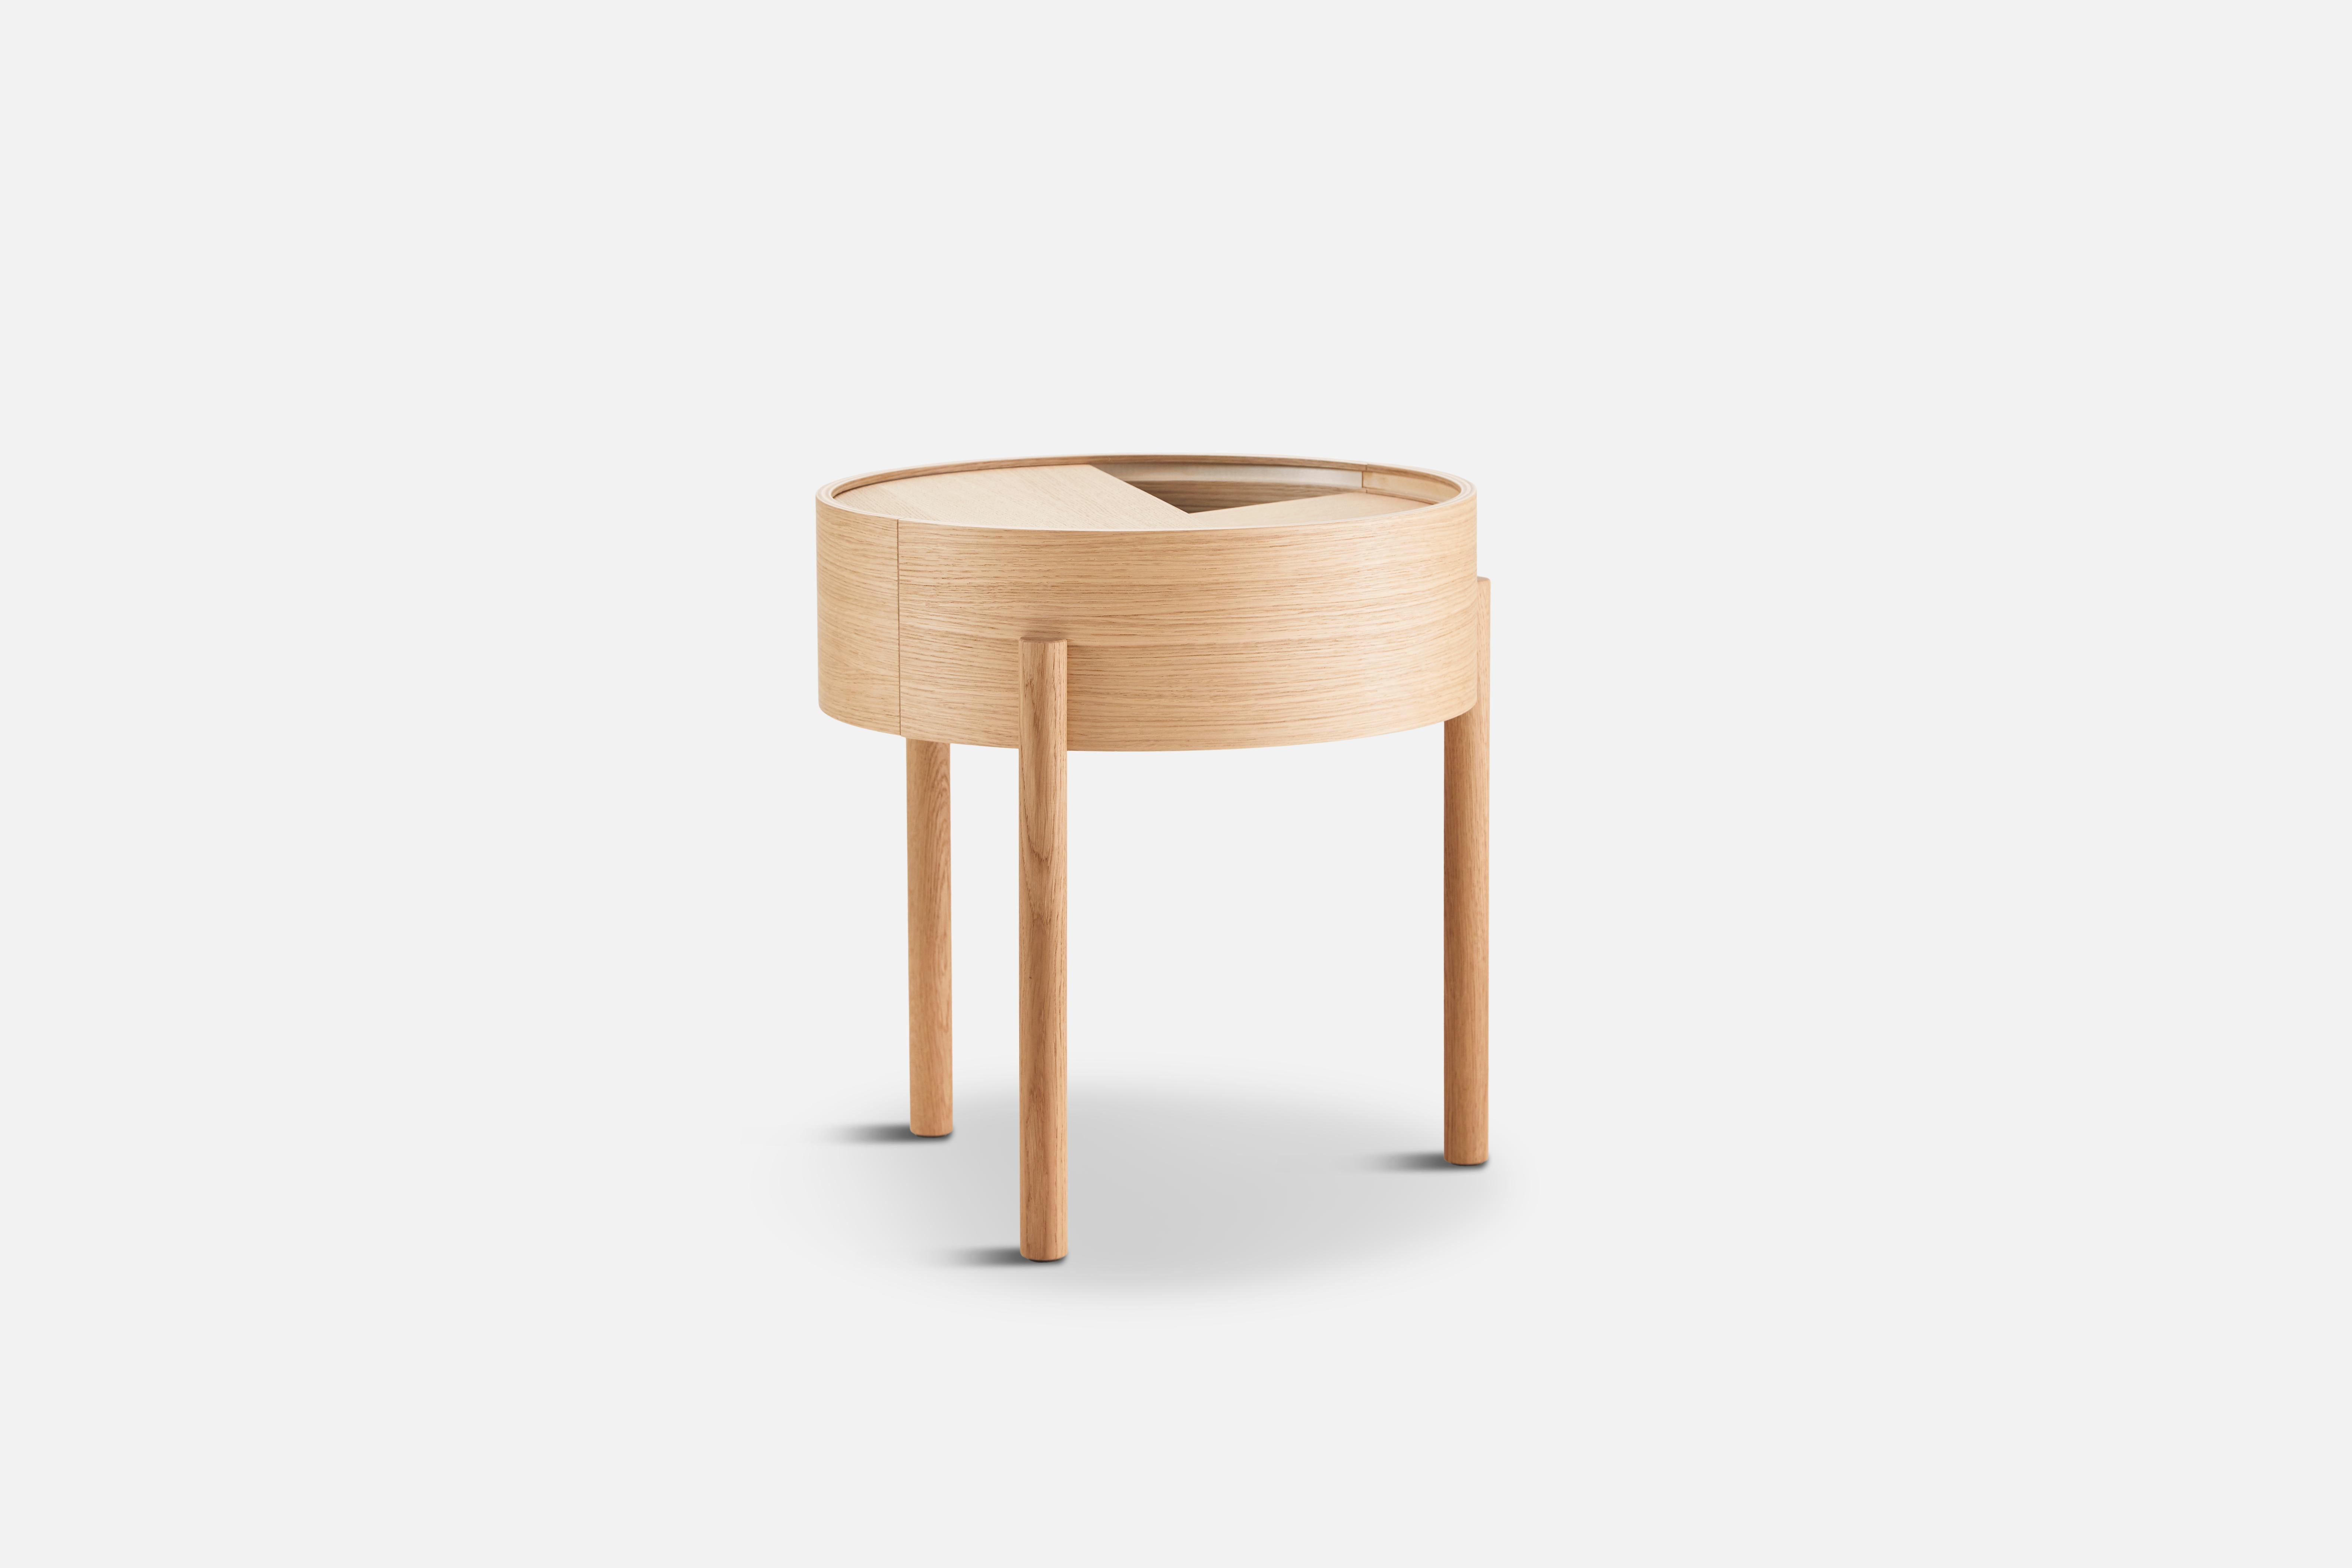 White oak arc side table by Ditte Vad and Julie Bertrup.
Materials: oak, lacquer. 
Dimensions: D 42 x W 42 x H 45 cm.

The founders, Mia and Torben Koed, decided to put their 30 years of experience into a new project. It was time for a change